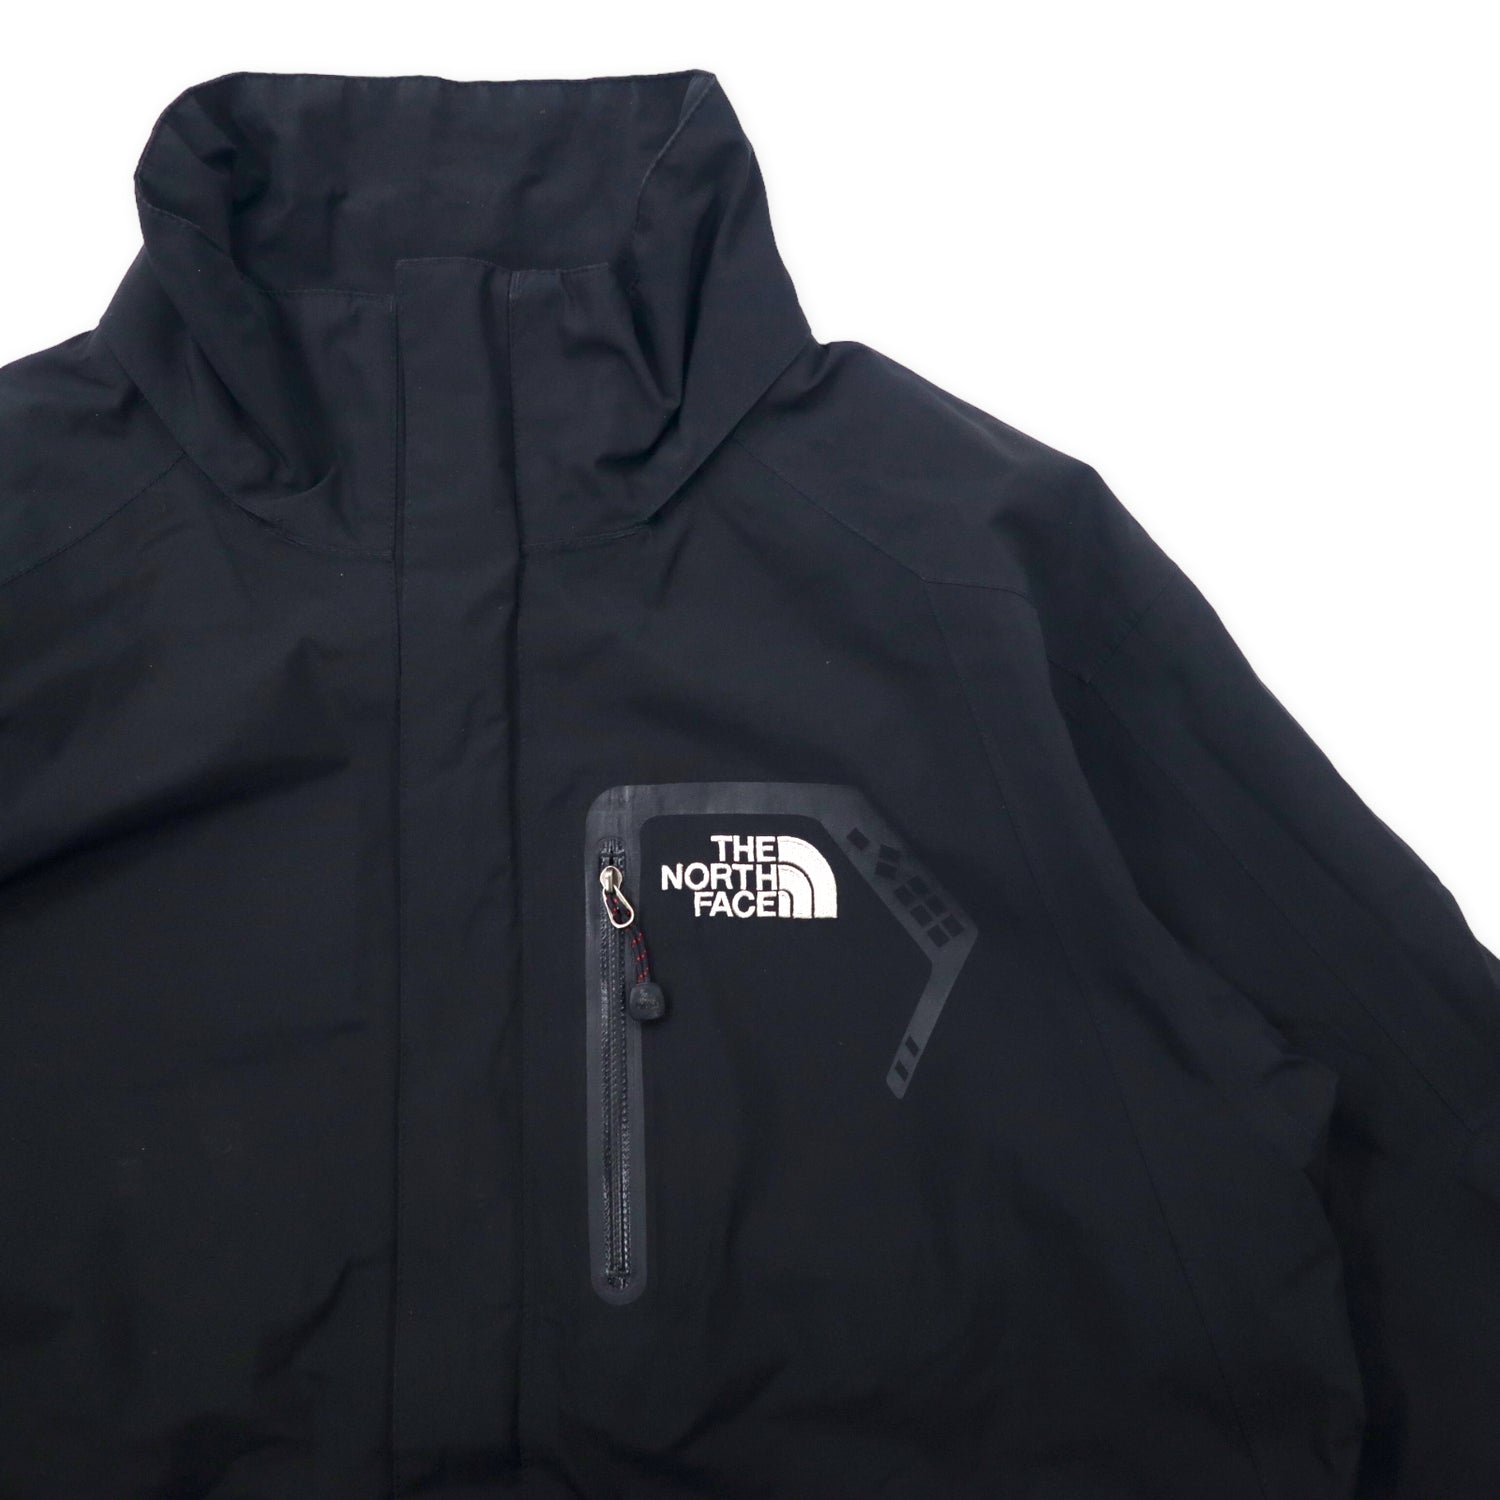 THE NORTH FACE Gore-Tex Mountain Jacket L Black GORE-TEX Double 